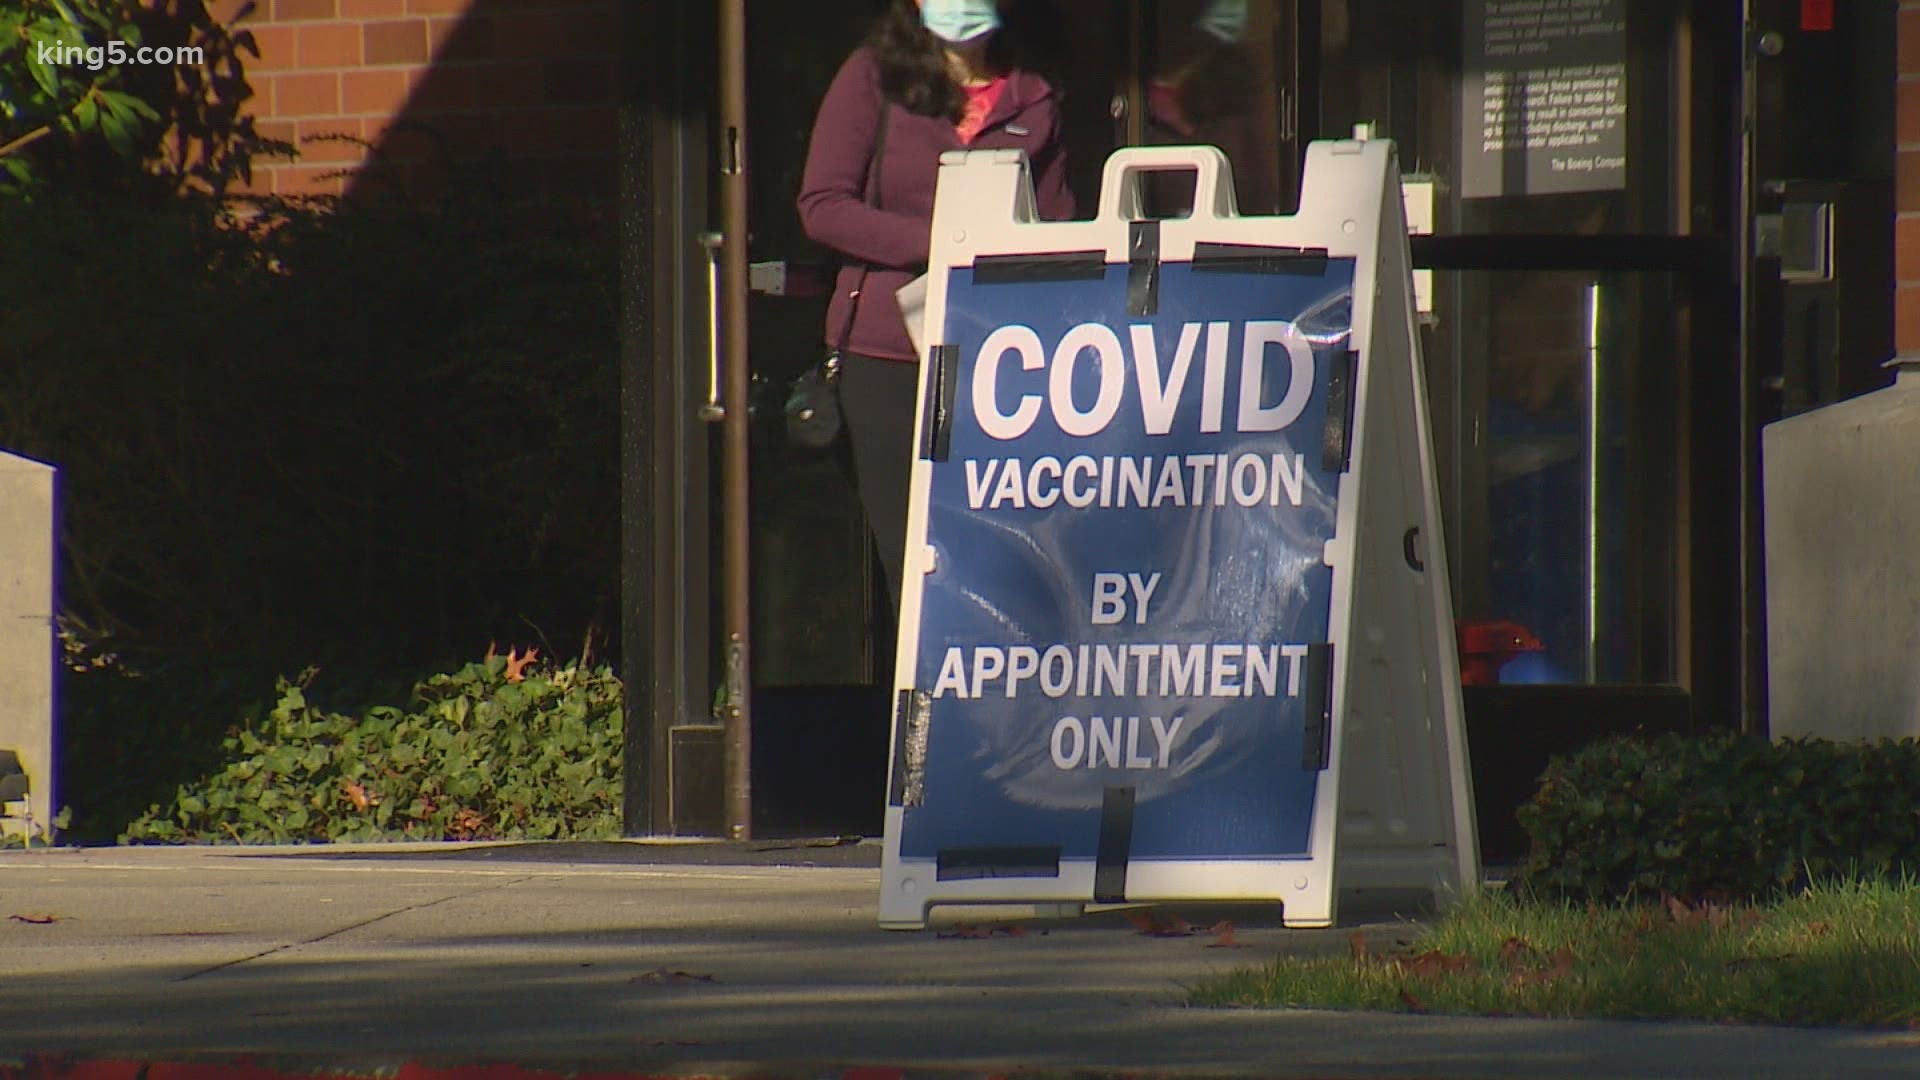 More than 600 facilities requested more than 358,000 first doses of the COVID-19 vaccine this week, but the state only received 107,000 doses from the feds.